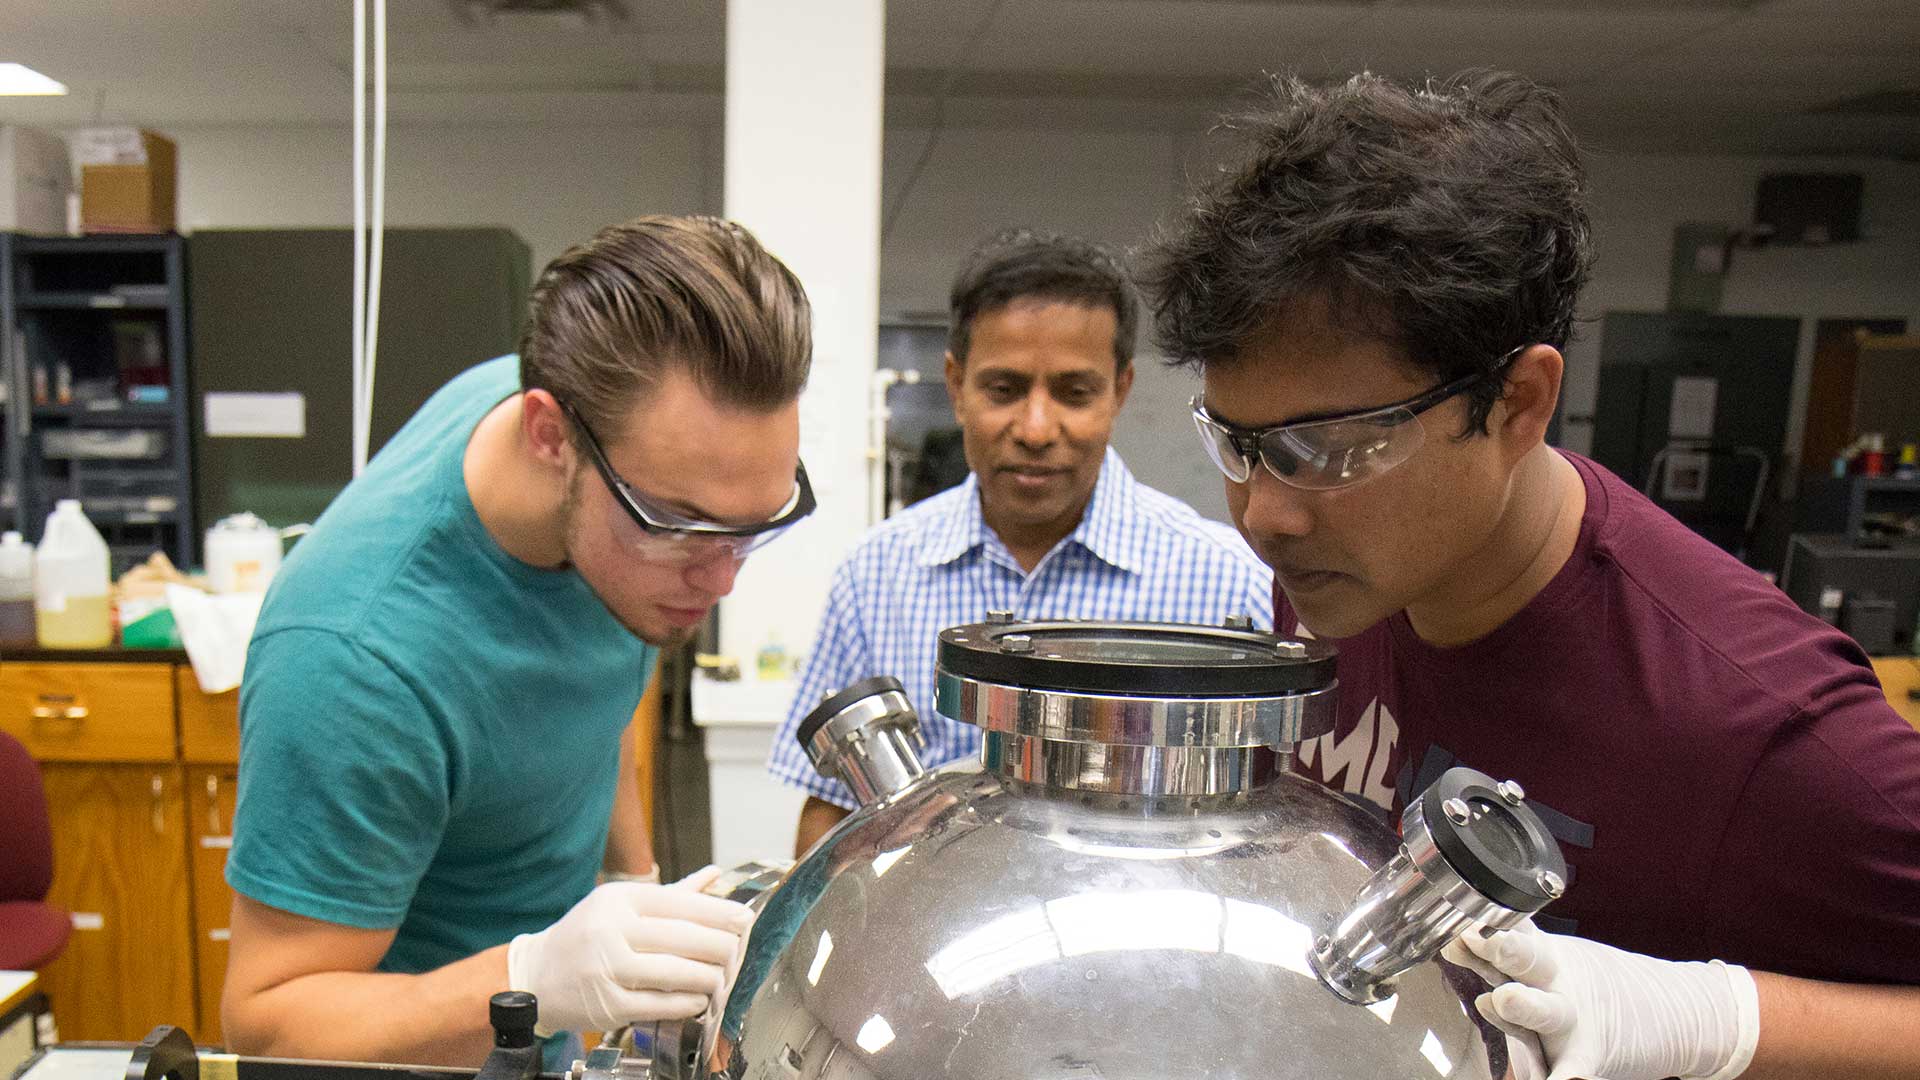 Graduate students and physics professor using pulsed laser deposition.